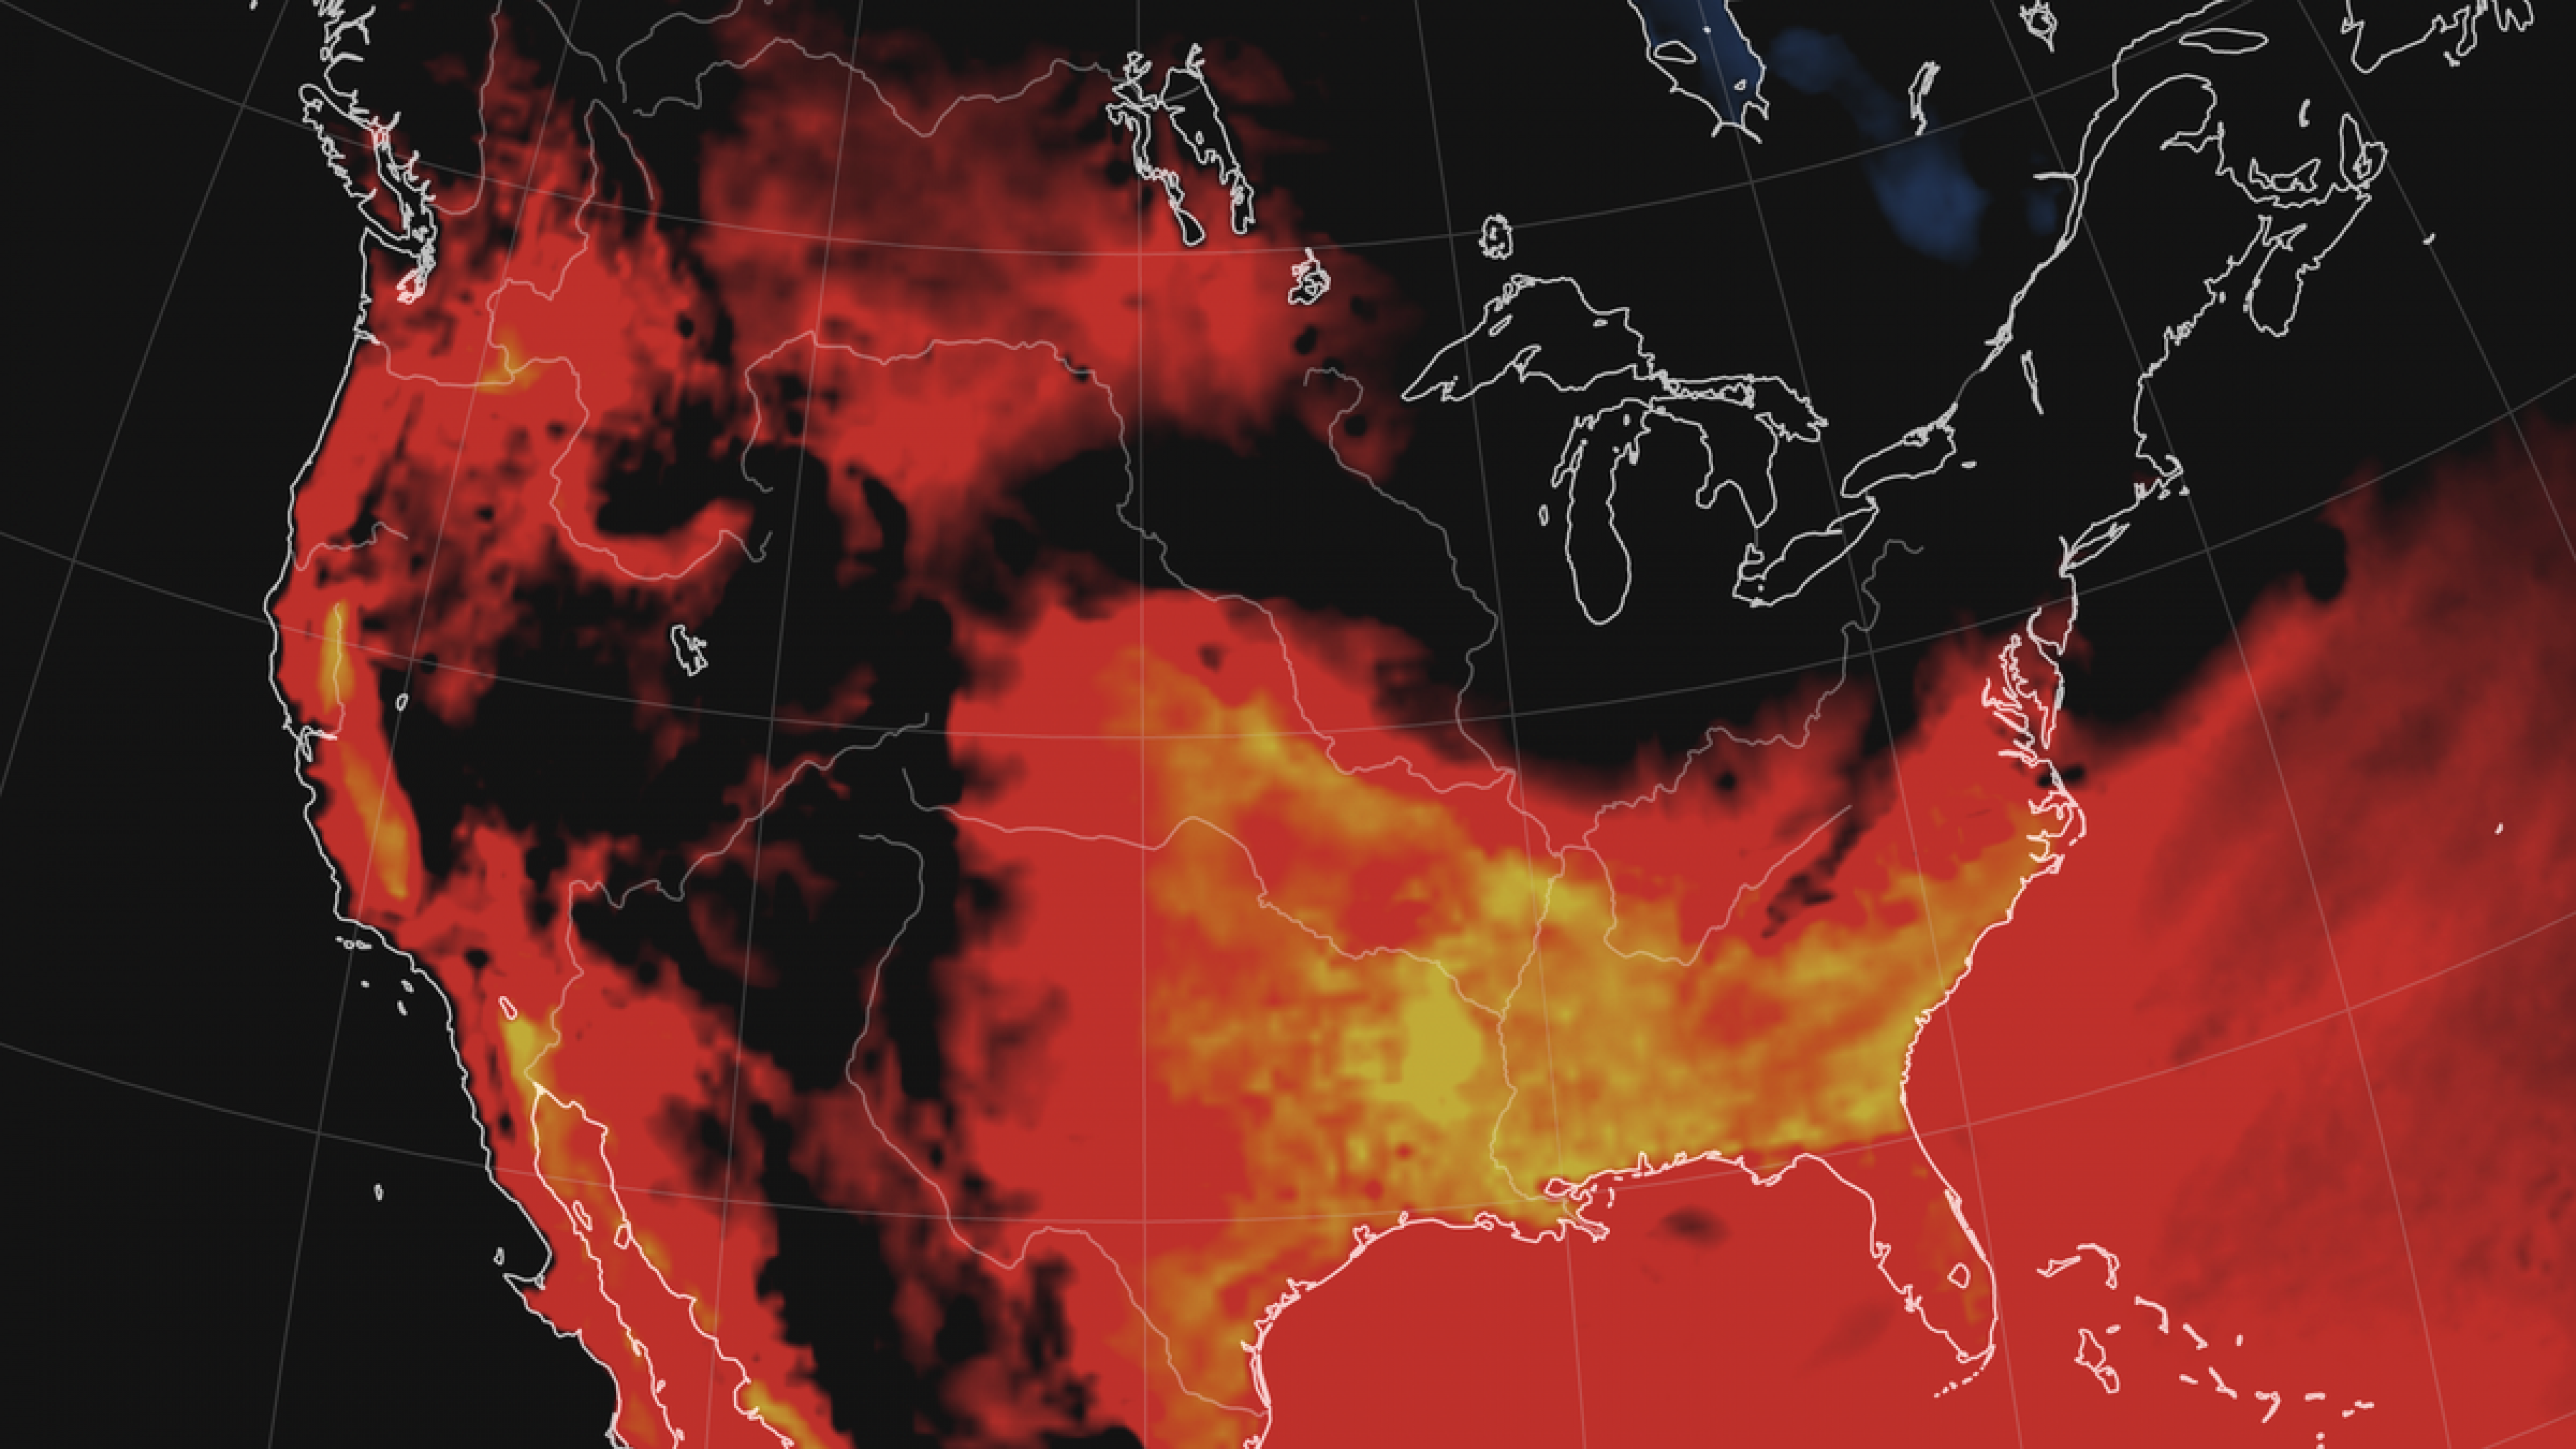 81 Million Americans Are Suffering Under Heat Watches and Warnings